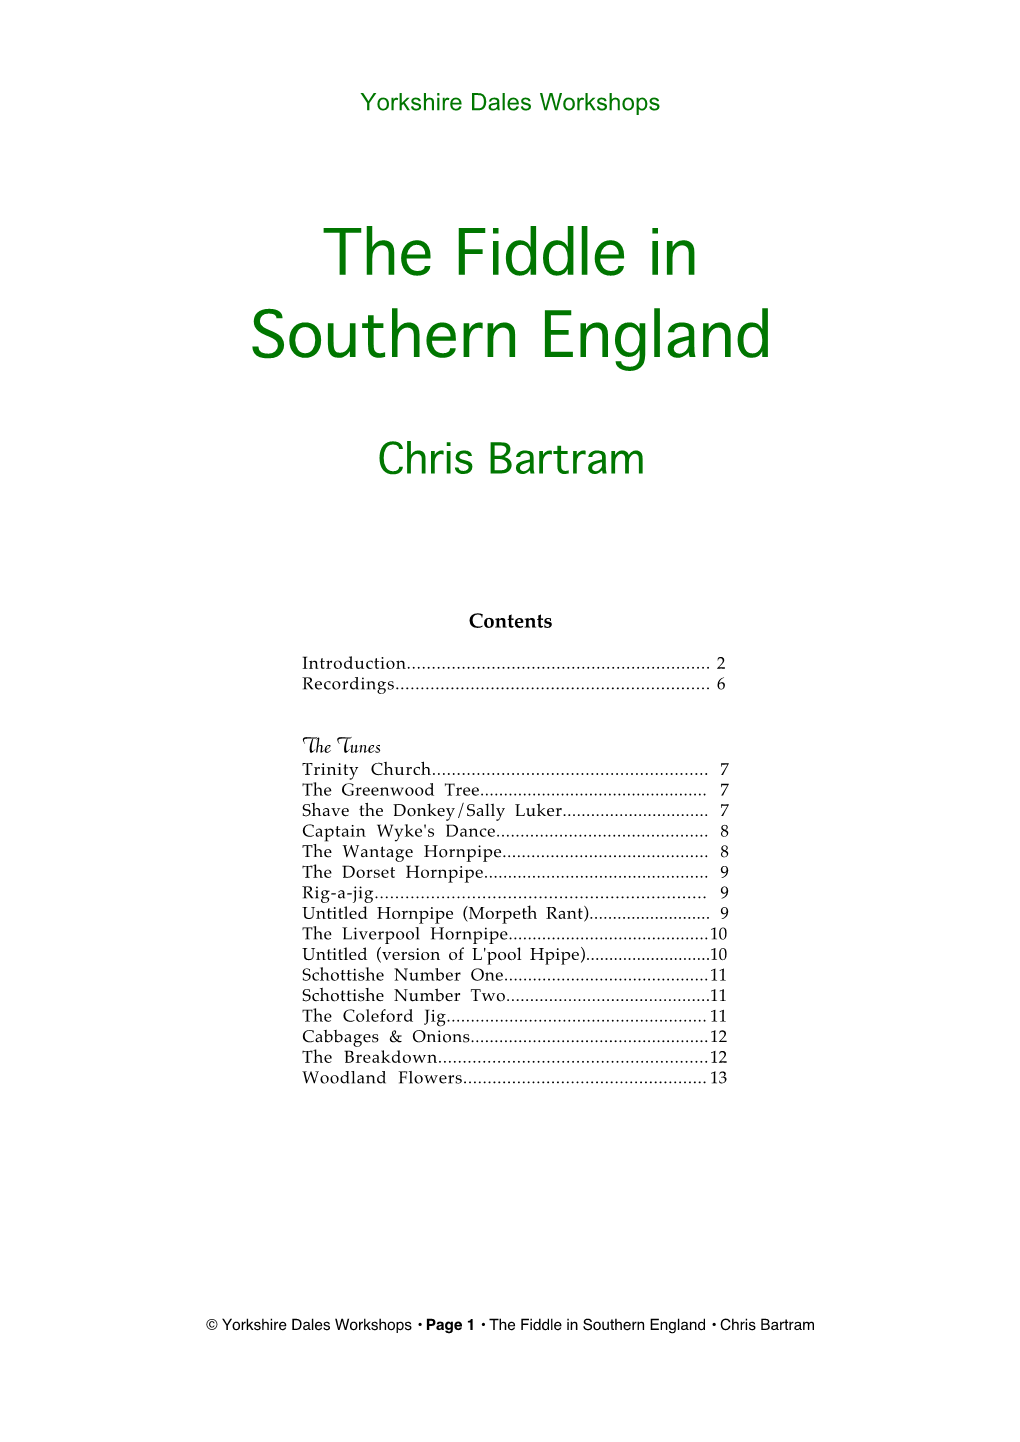 The Fiddle in Southern England